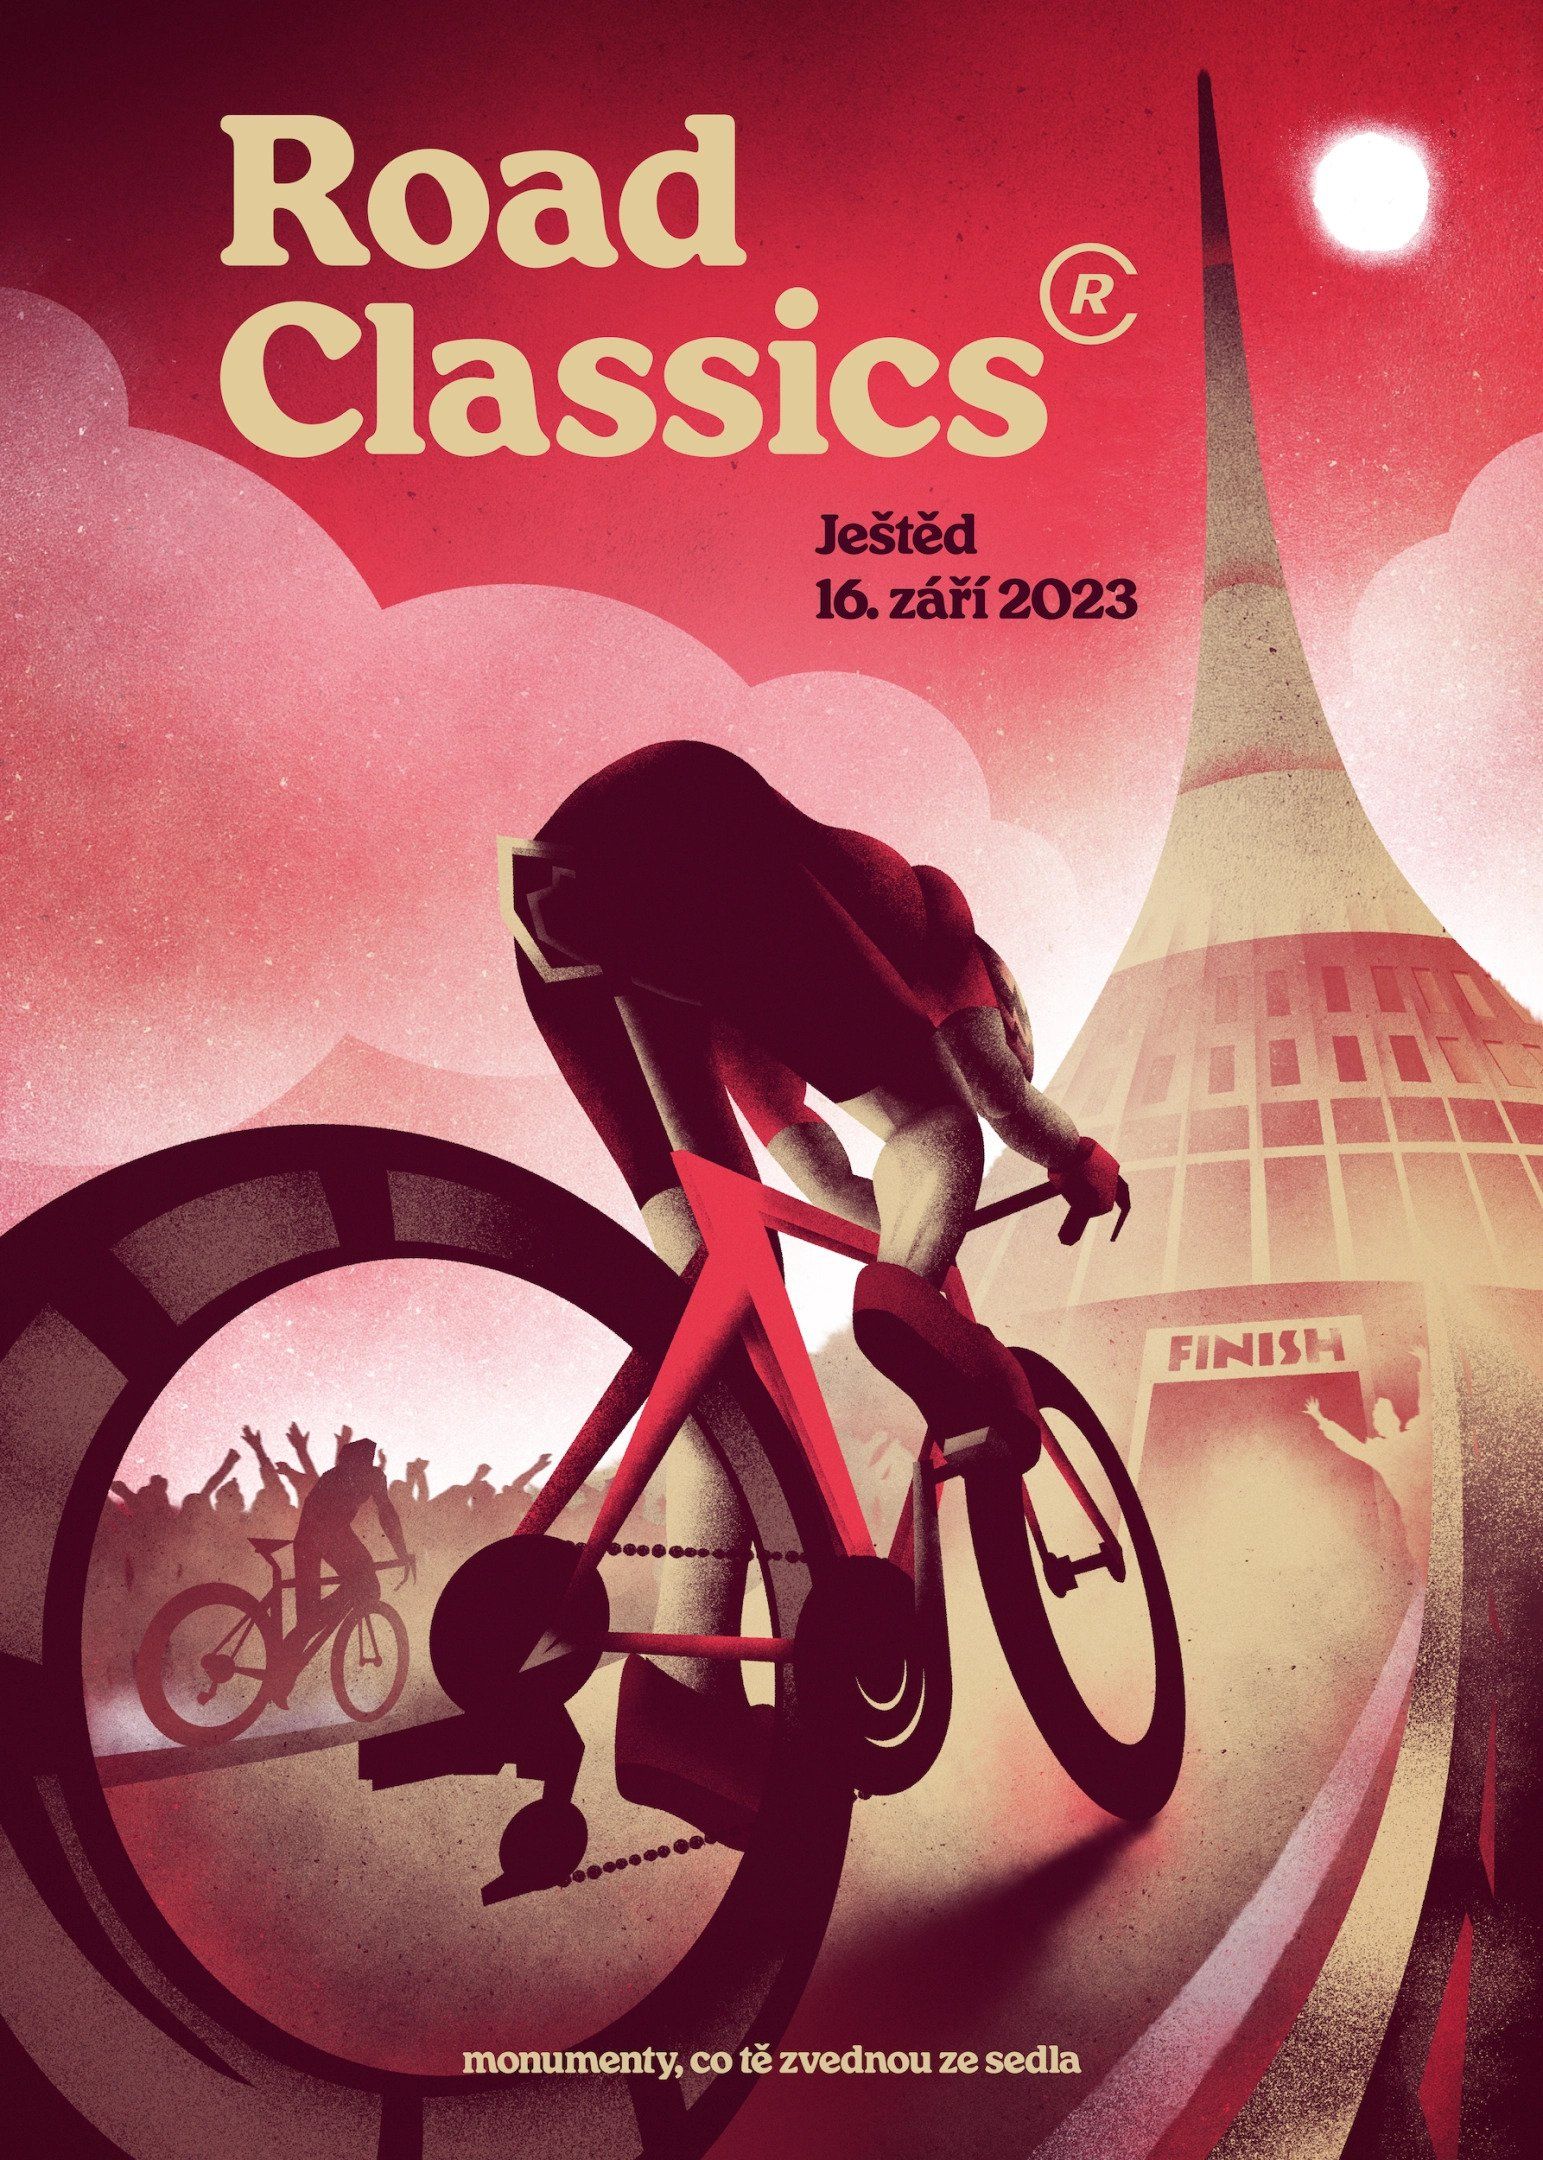 omski&Polanski, 2023, poster for the premiere episode of the cycling series "Road Classics" culminating at the iconic Ještěd